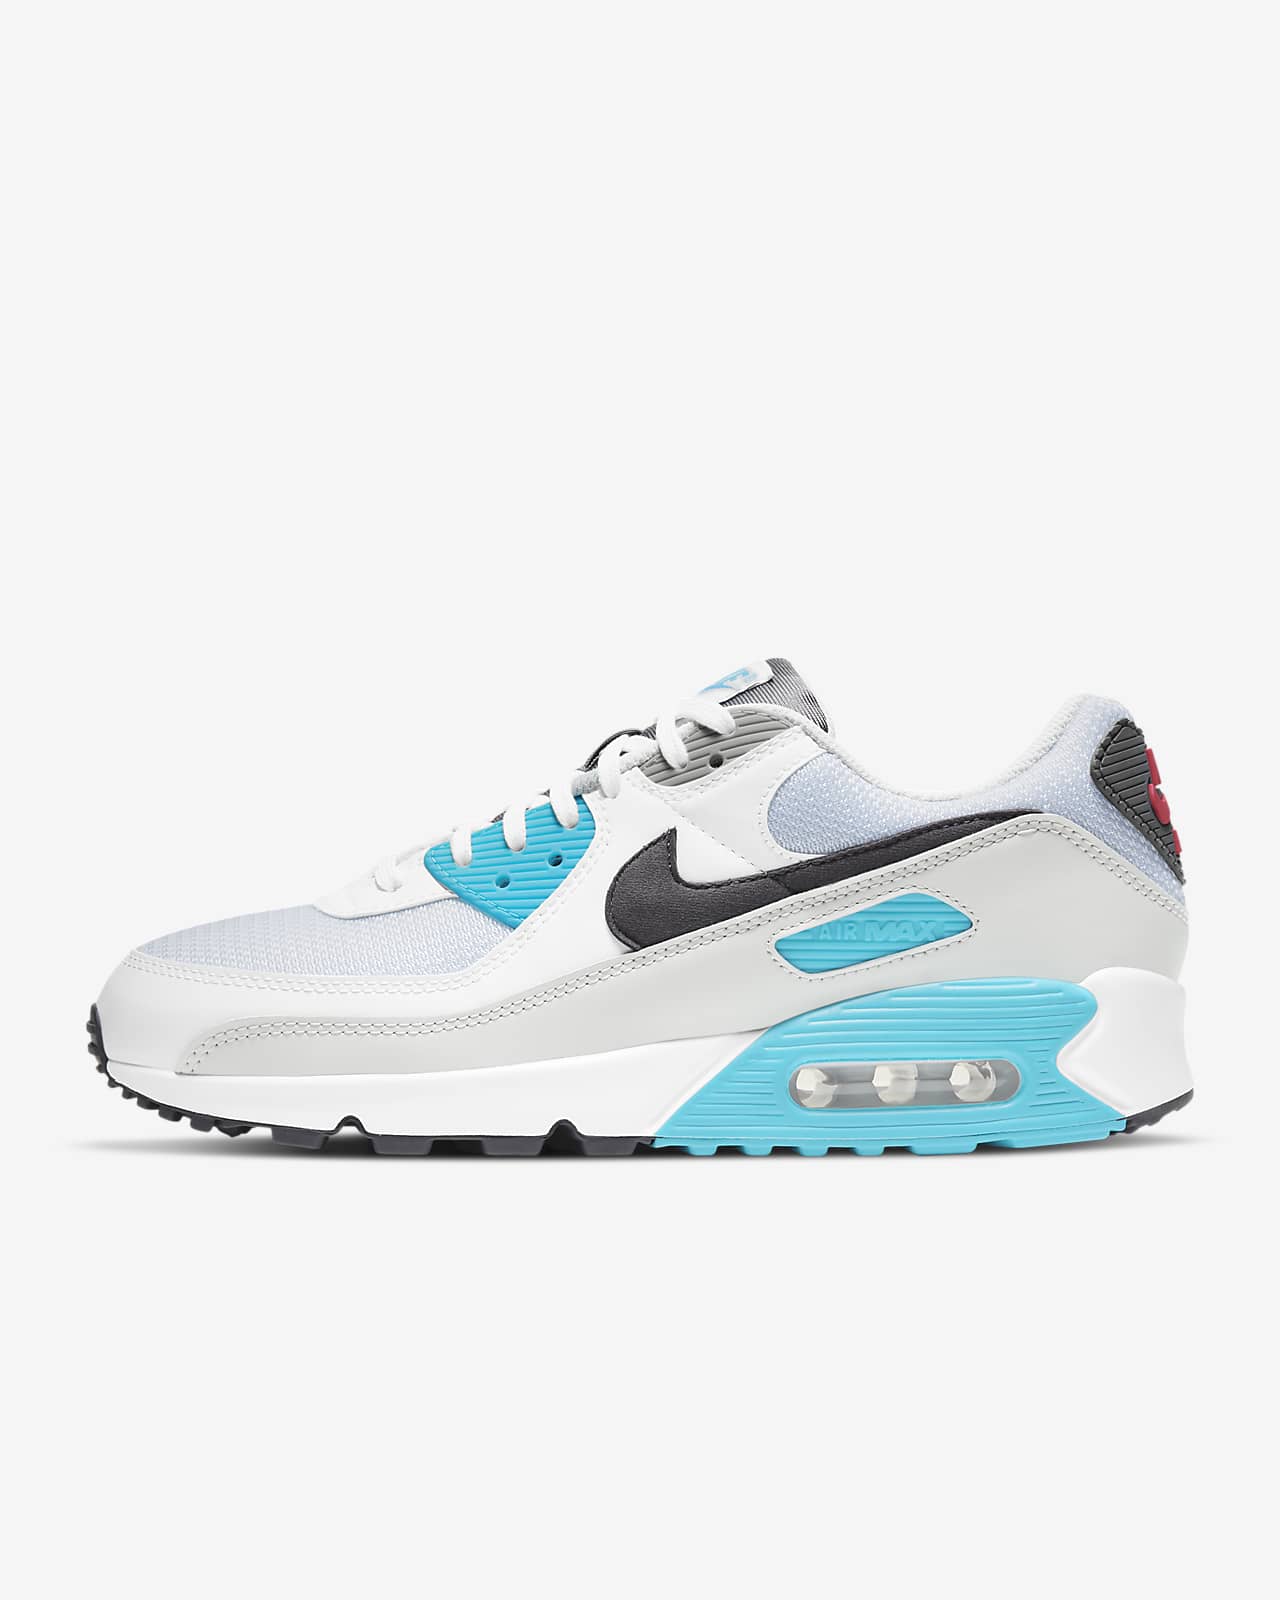 are nike air max 90 good for running